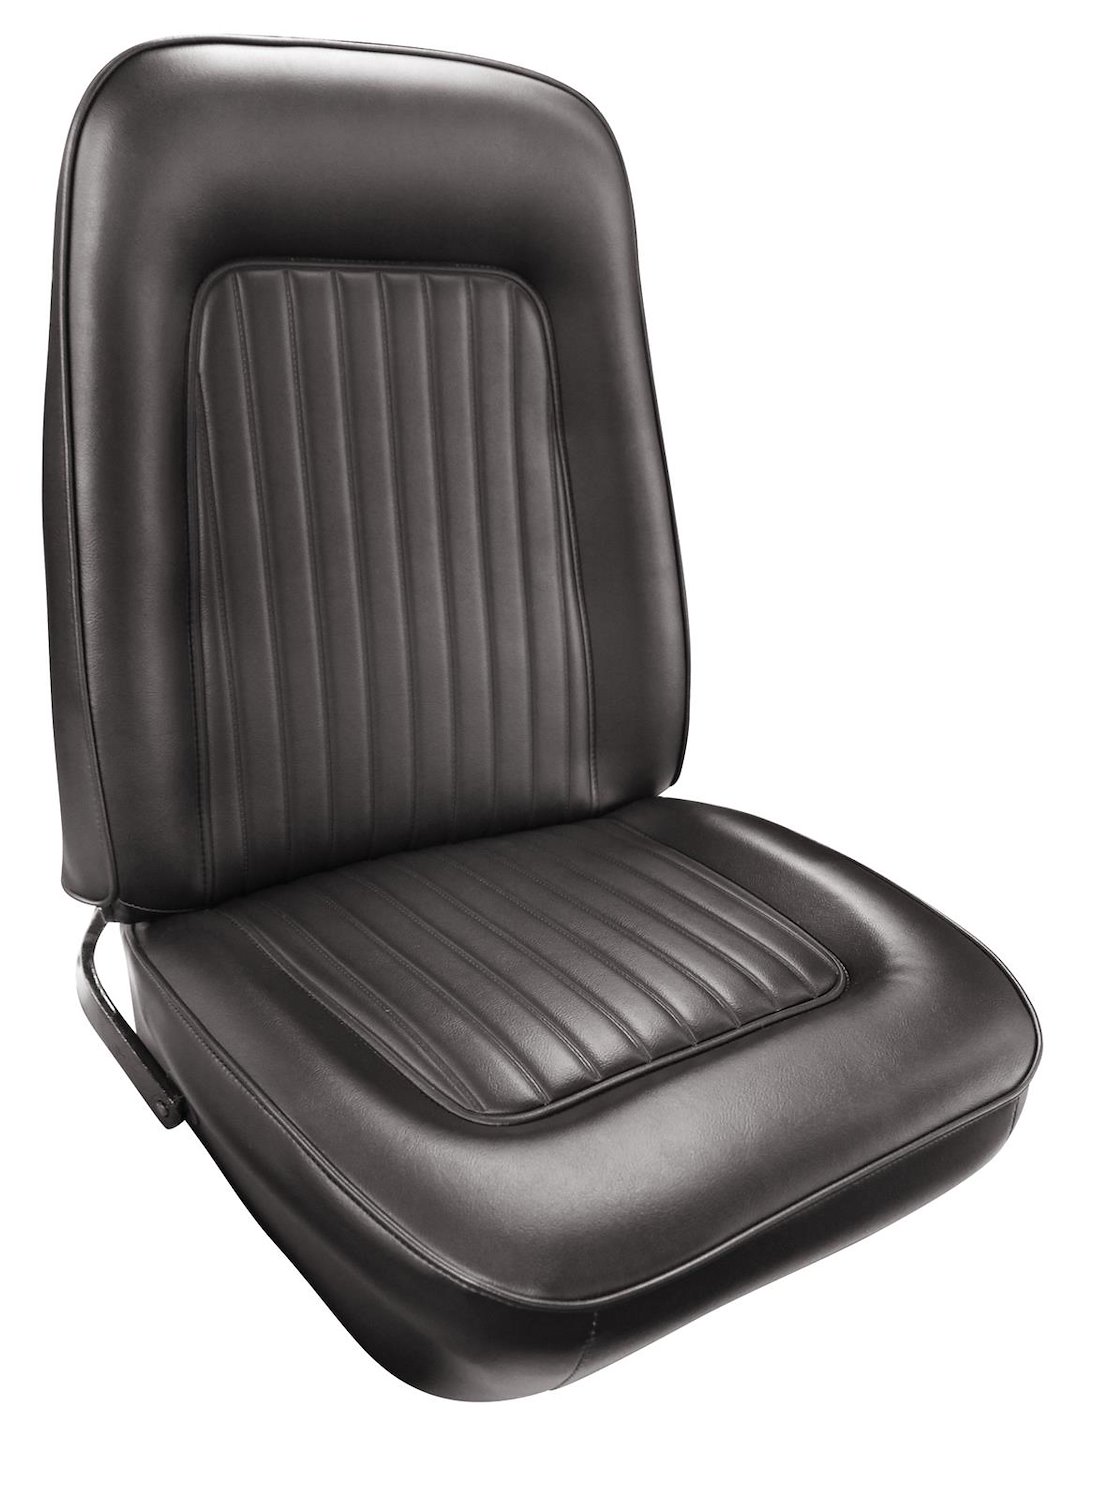 1969 Chevrolet Camaro Deluxe Houndstooth Interior Touring Front Bucket Seat Upholstery Set.